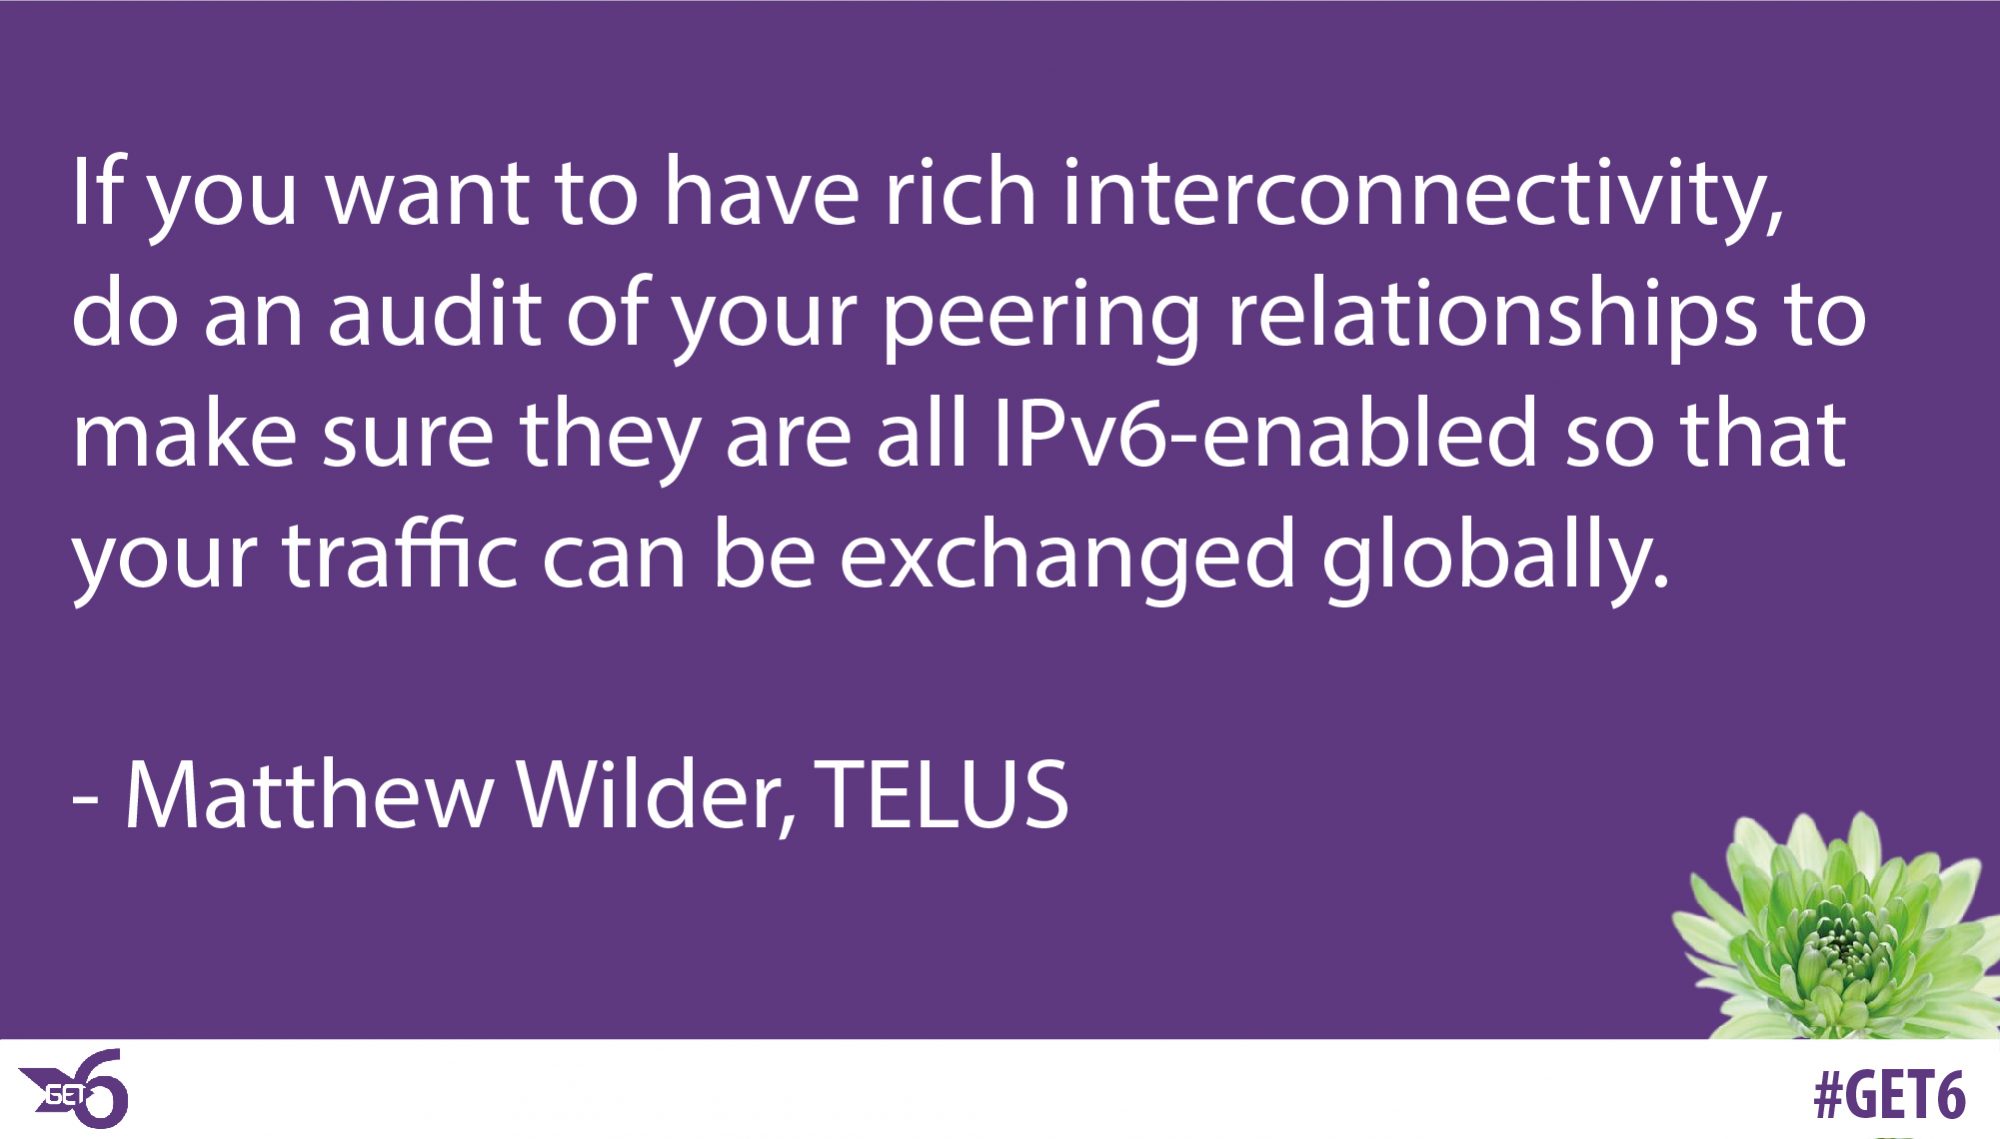 ” If you want to have rich interconnectivity, do an audit of your peering relationships to make sure they are all IPv6-enabled so that your traffic can be exchanged globally.